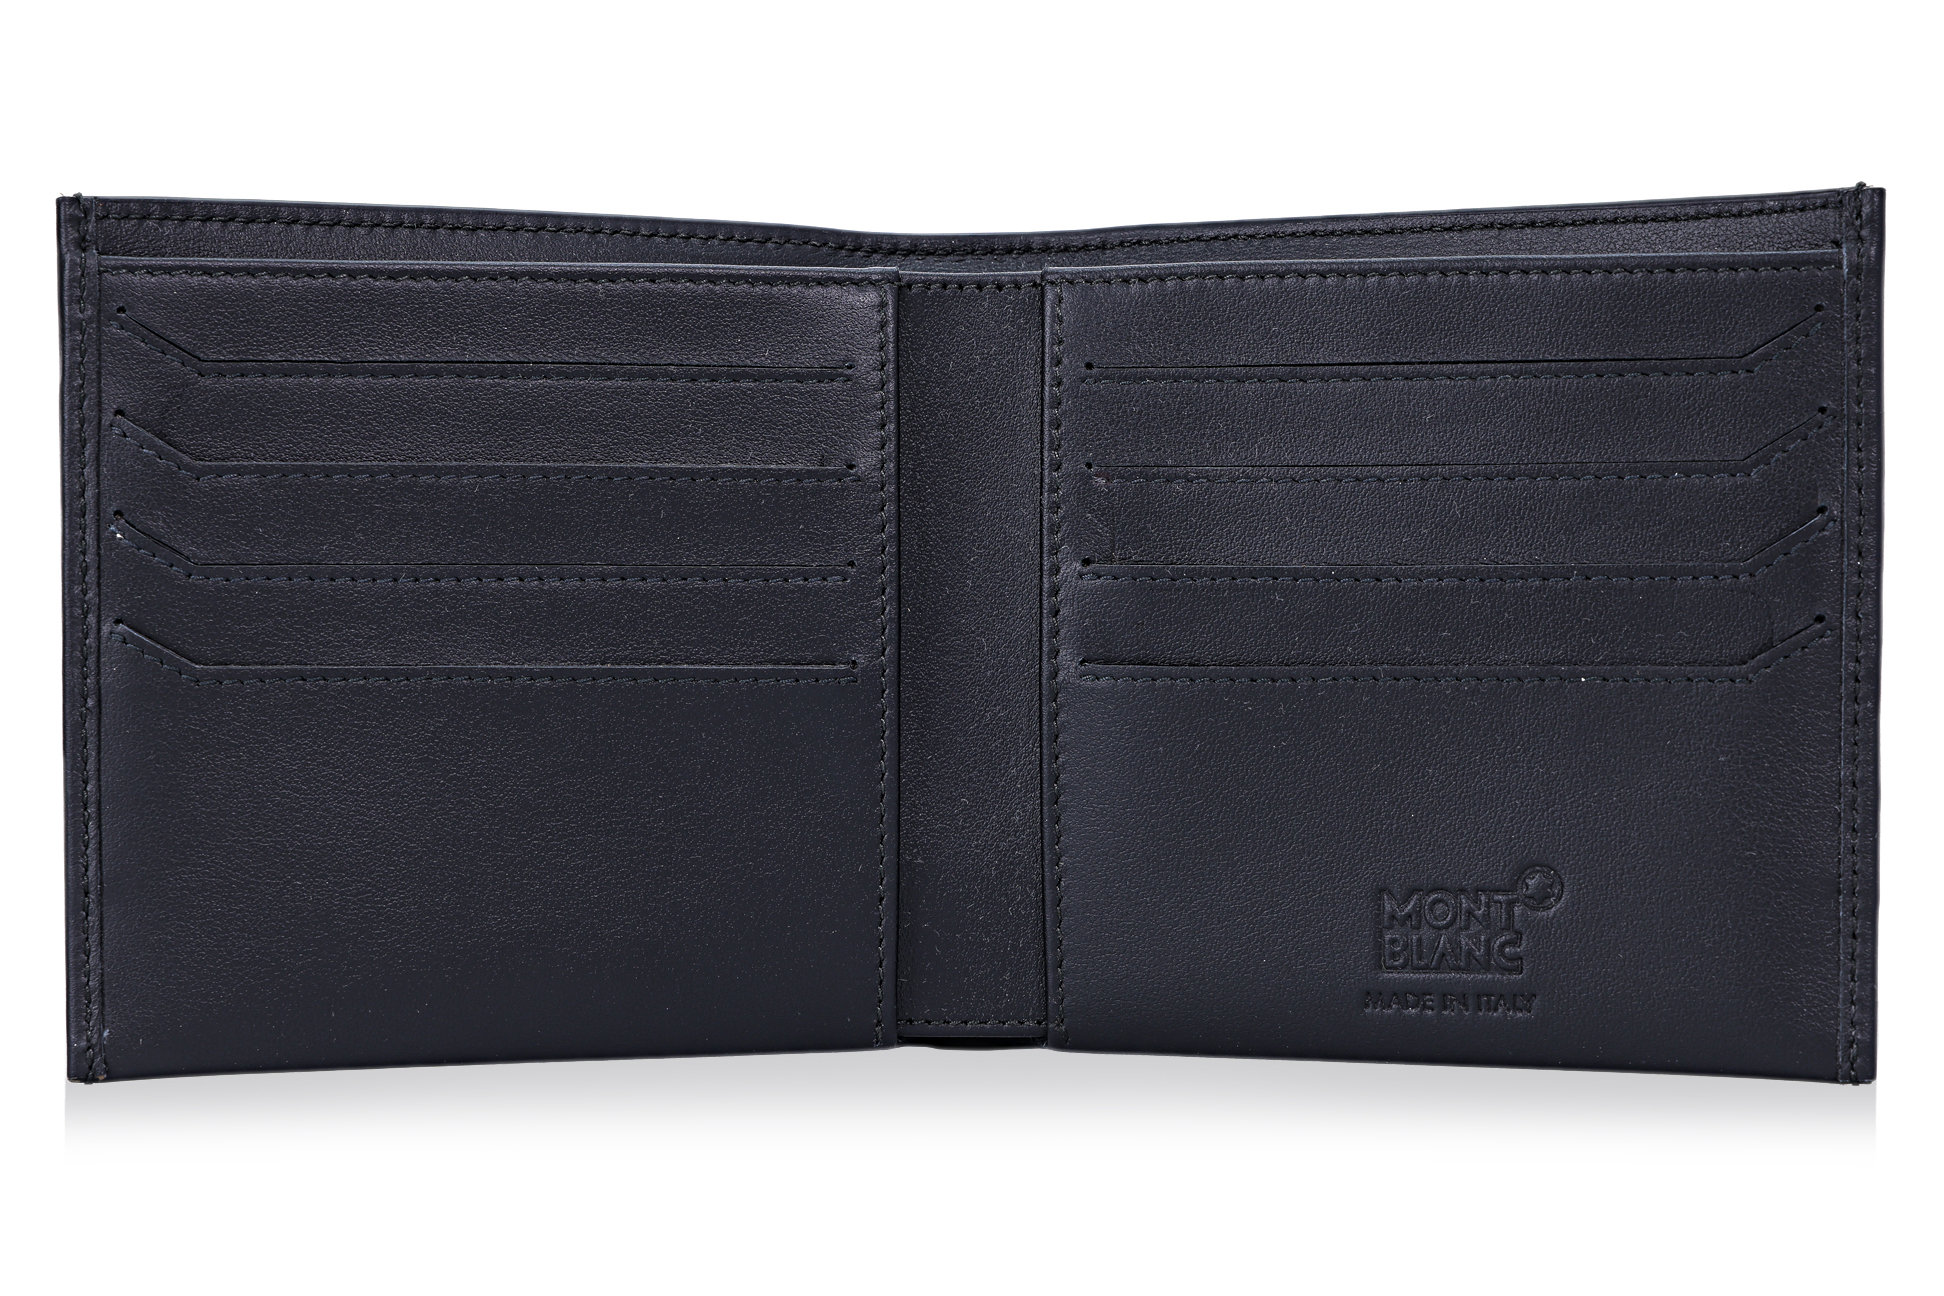 A MONTBLANC NIGHTFLIGHT WALLET - Image 4 of 4